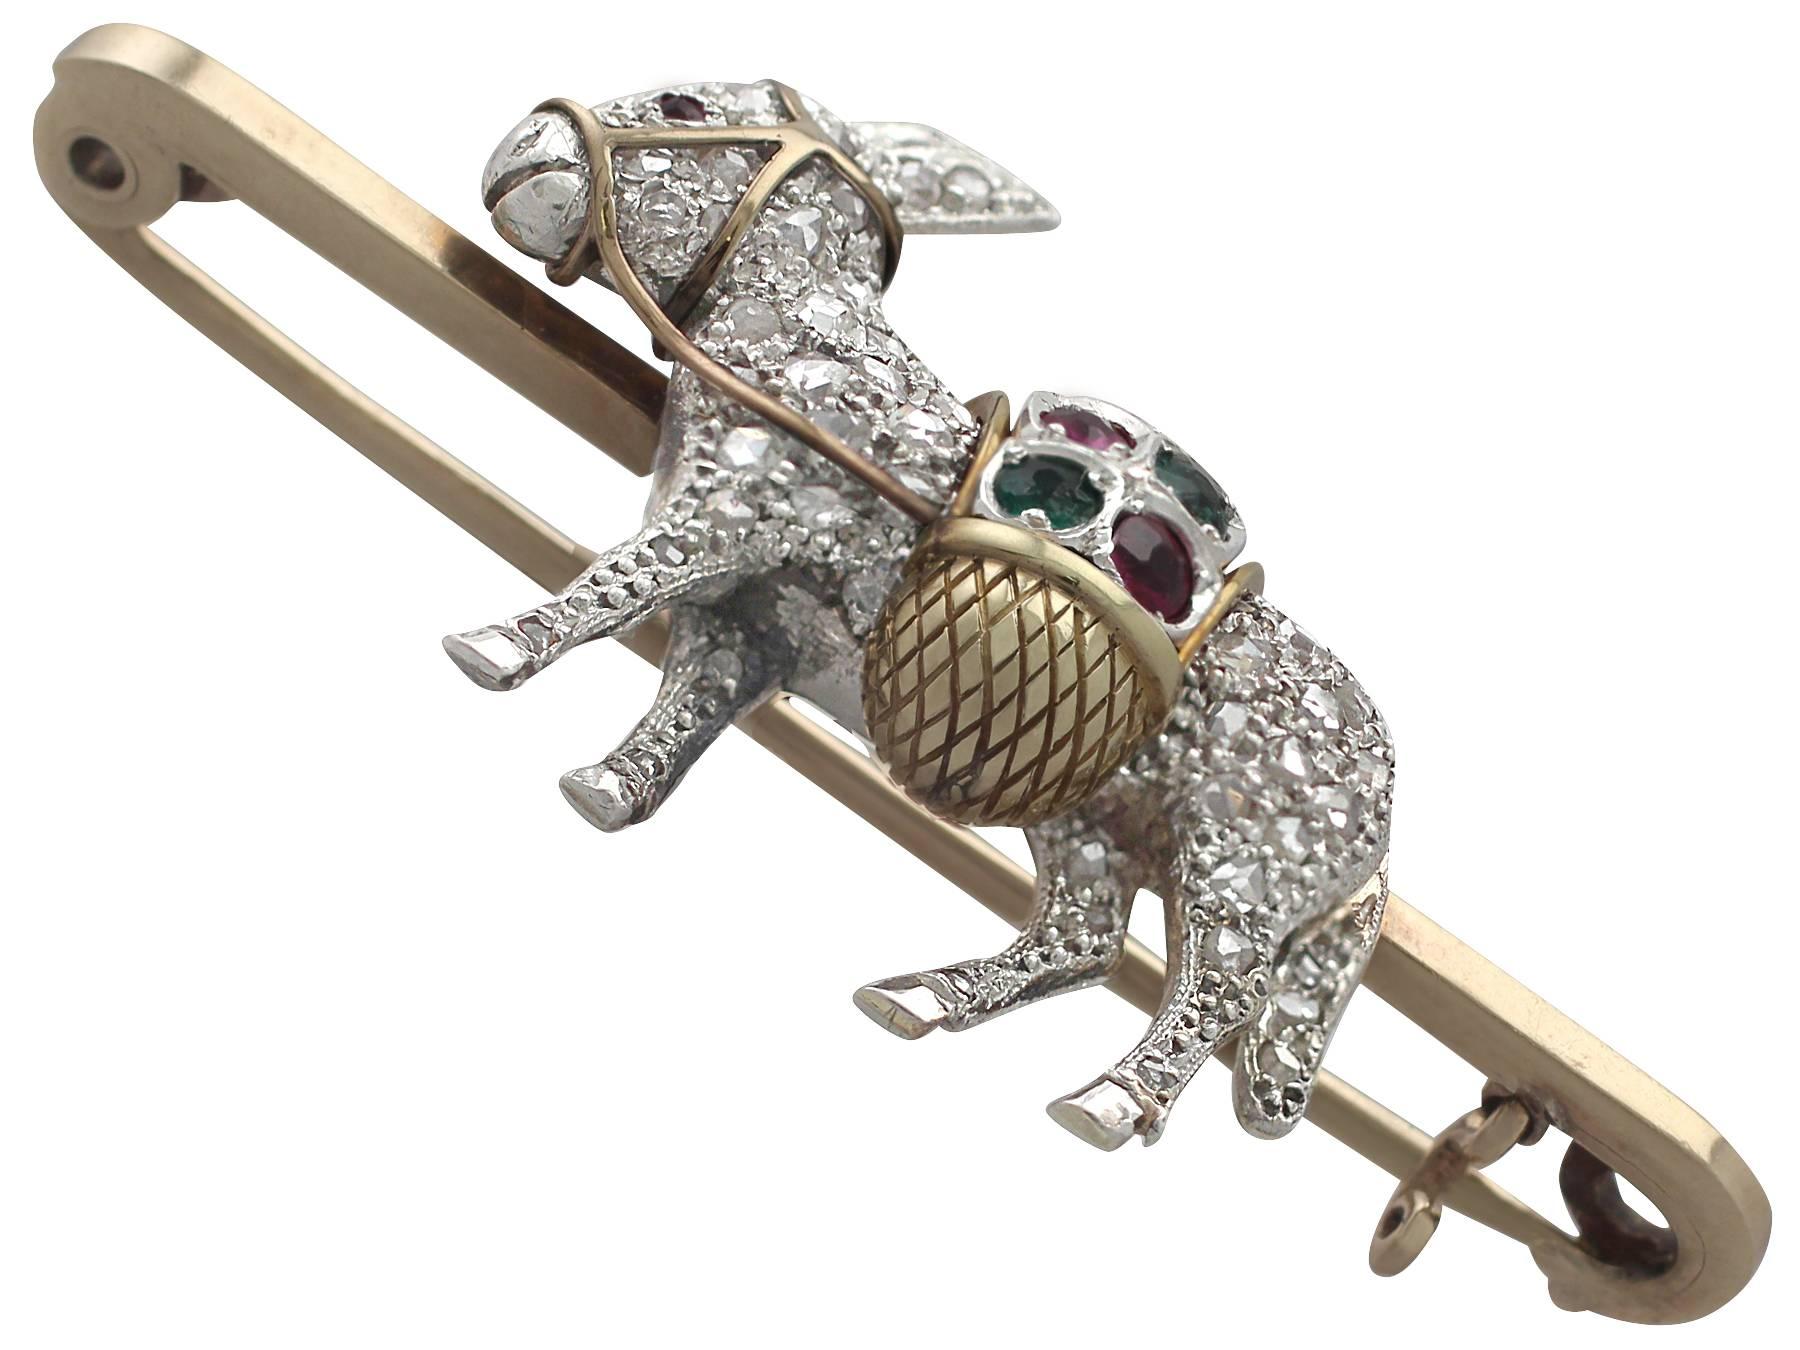 A fine and impressive 0.48 carat diamond, 0.15 carat emerald and 0.10 carat ruby, 9 karat yellow gold bar brooch modelled in the form of a working donkey; part of our vintage jewelry and estate jewelry collections

This fine and impressive vintage